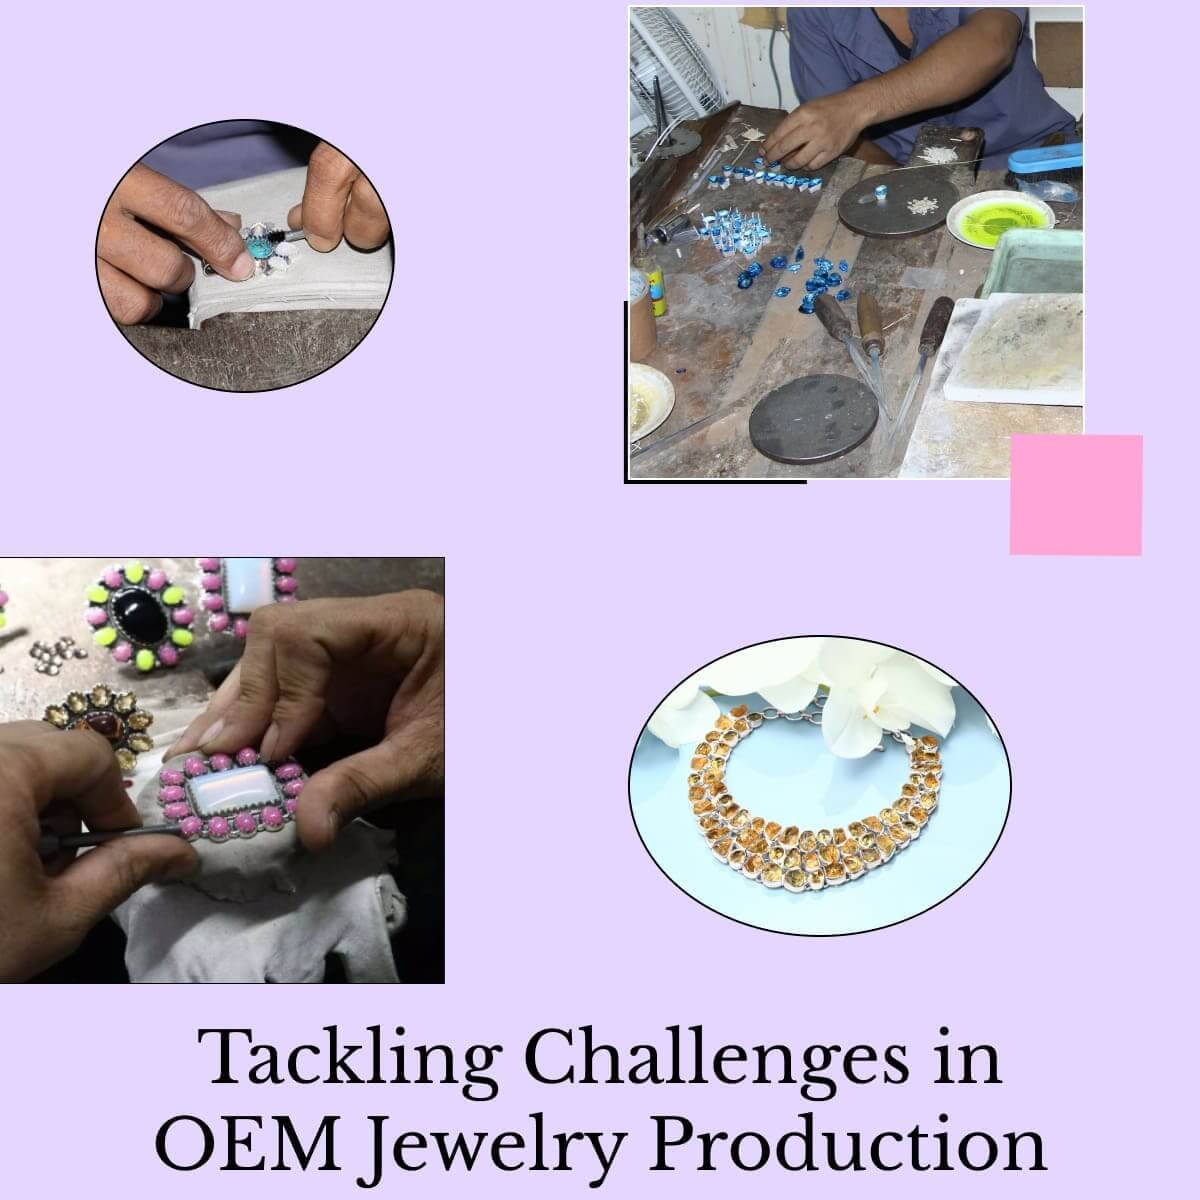 Challenges Faced By OEM Jewelry Manufacturers & Suppliers